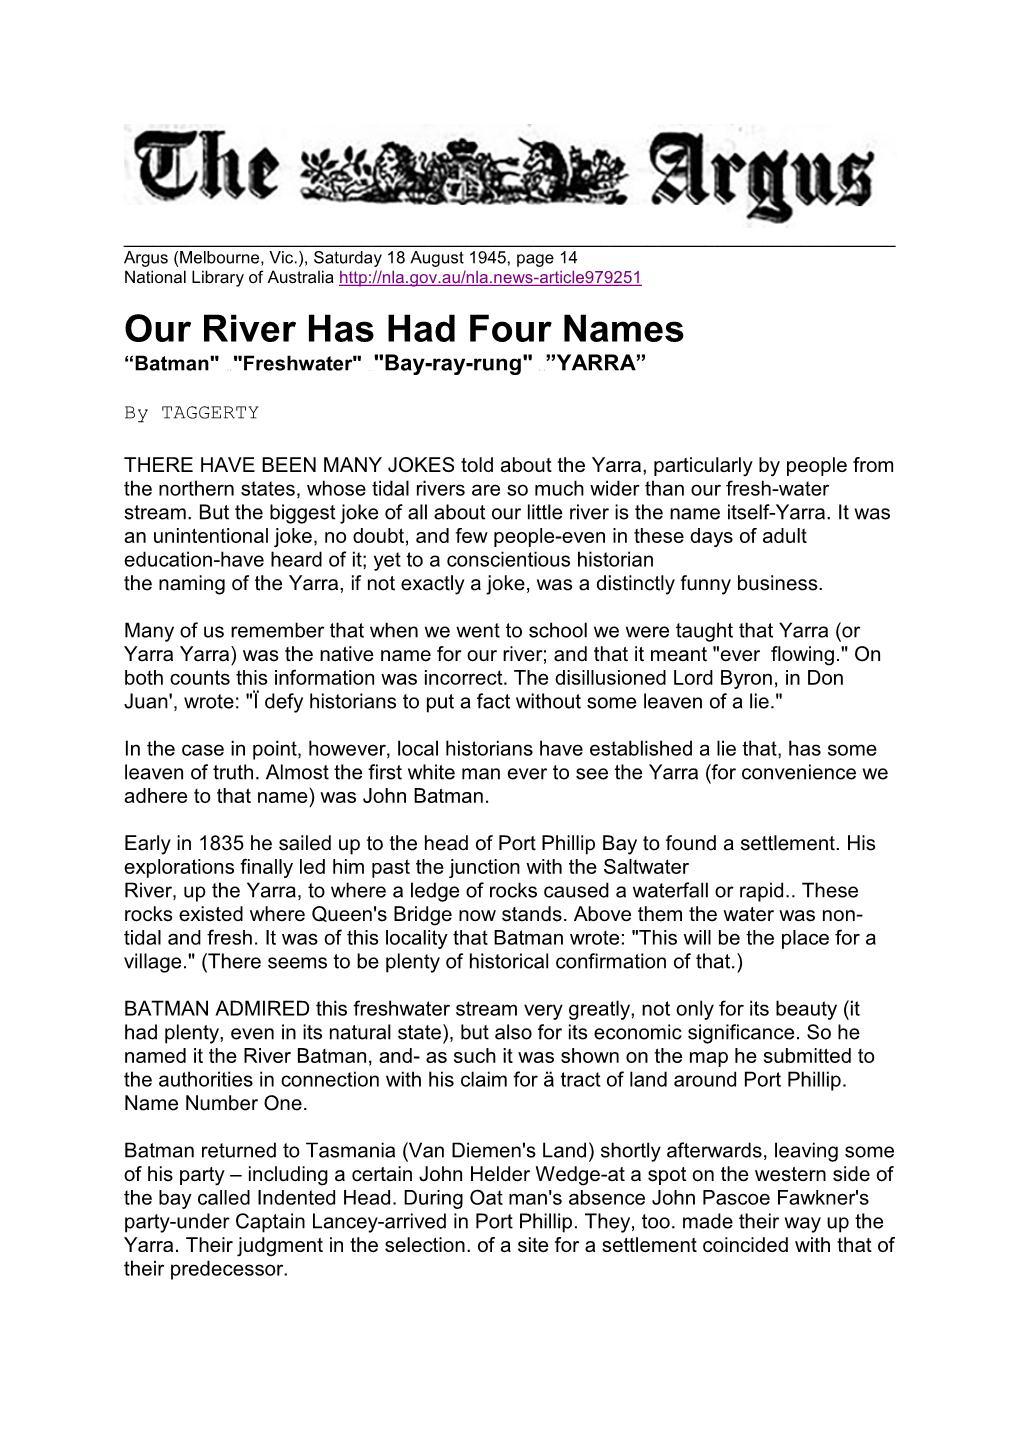 Our River Has Had Four Names